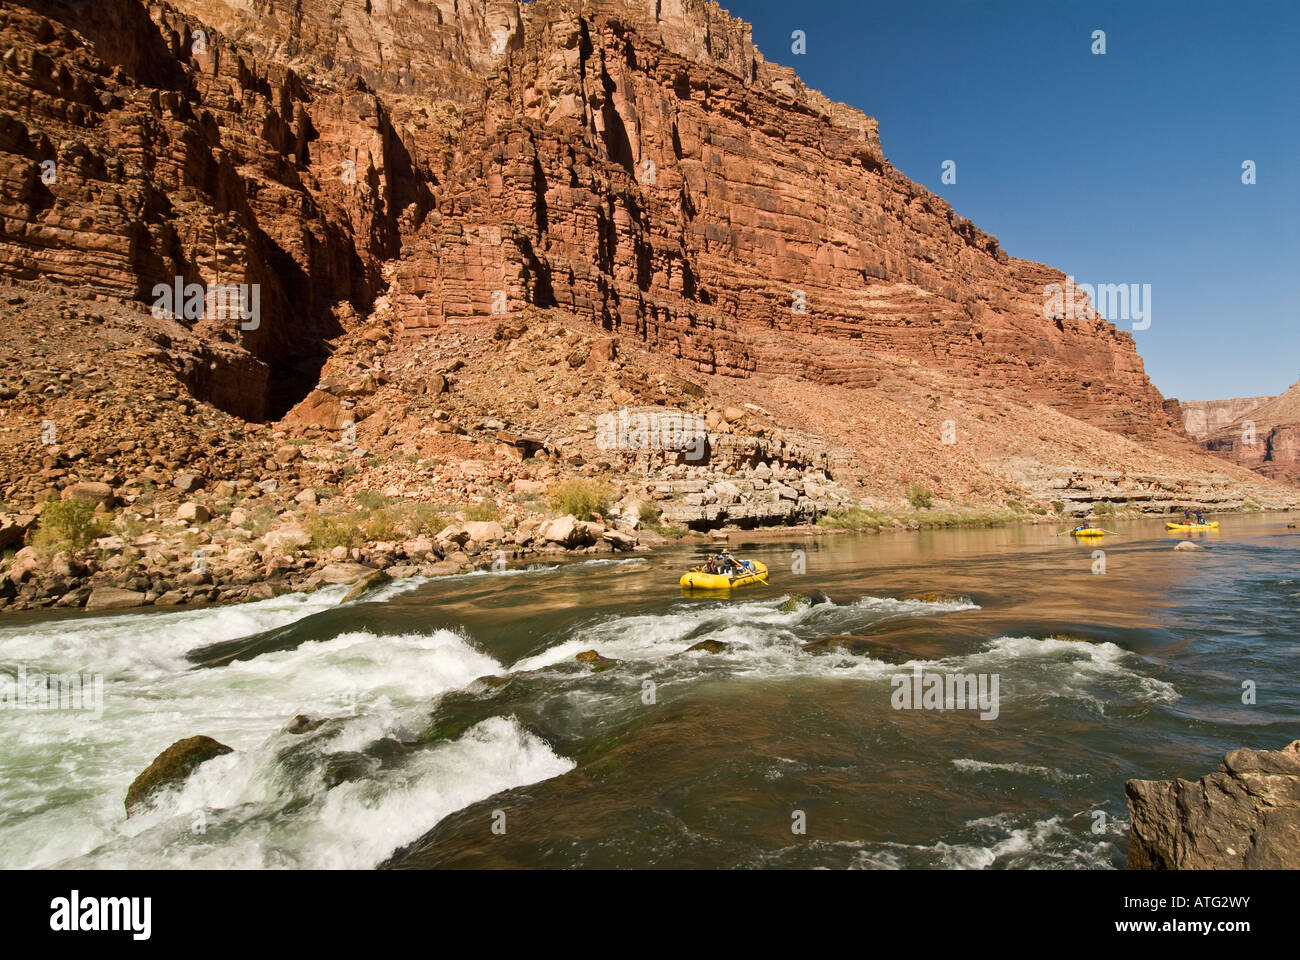 Running the Roaring Twenties while rafting the Colorado River in the Grand Canyon National Park Arizona Stock Photo